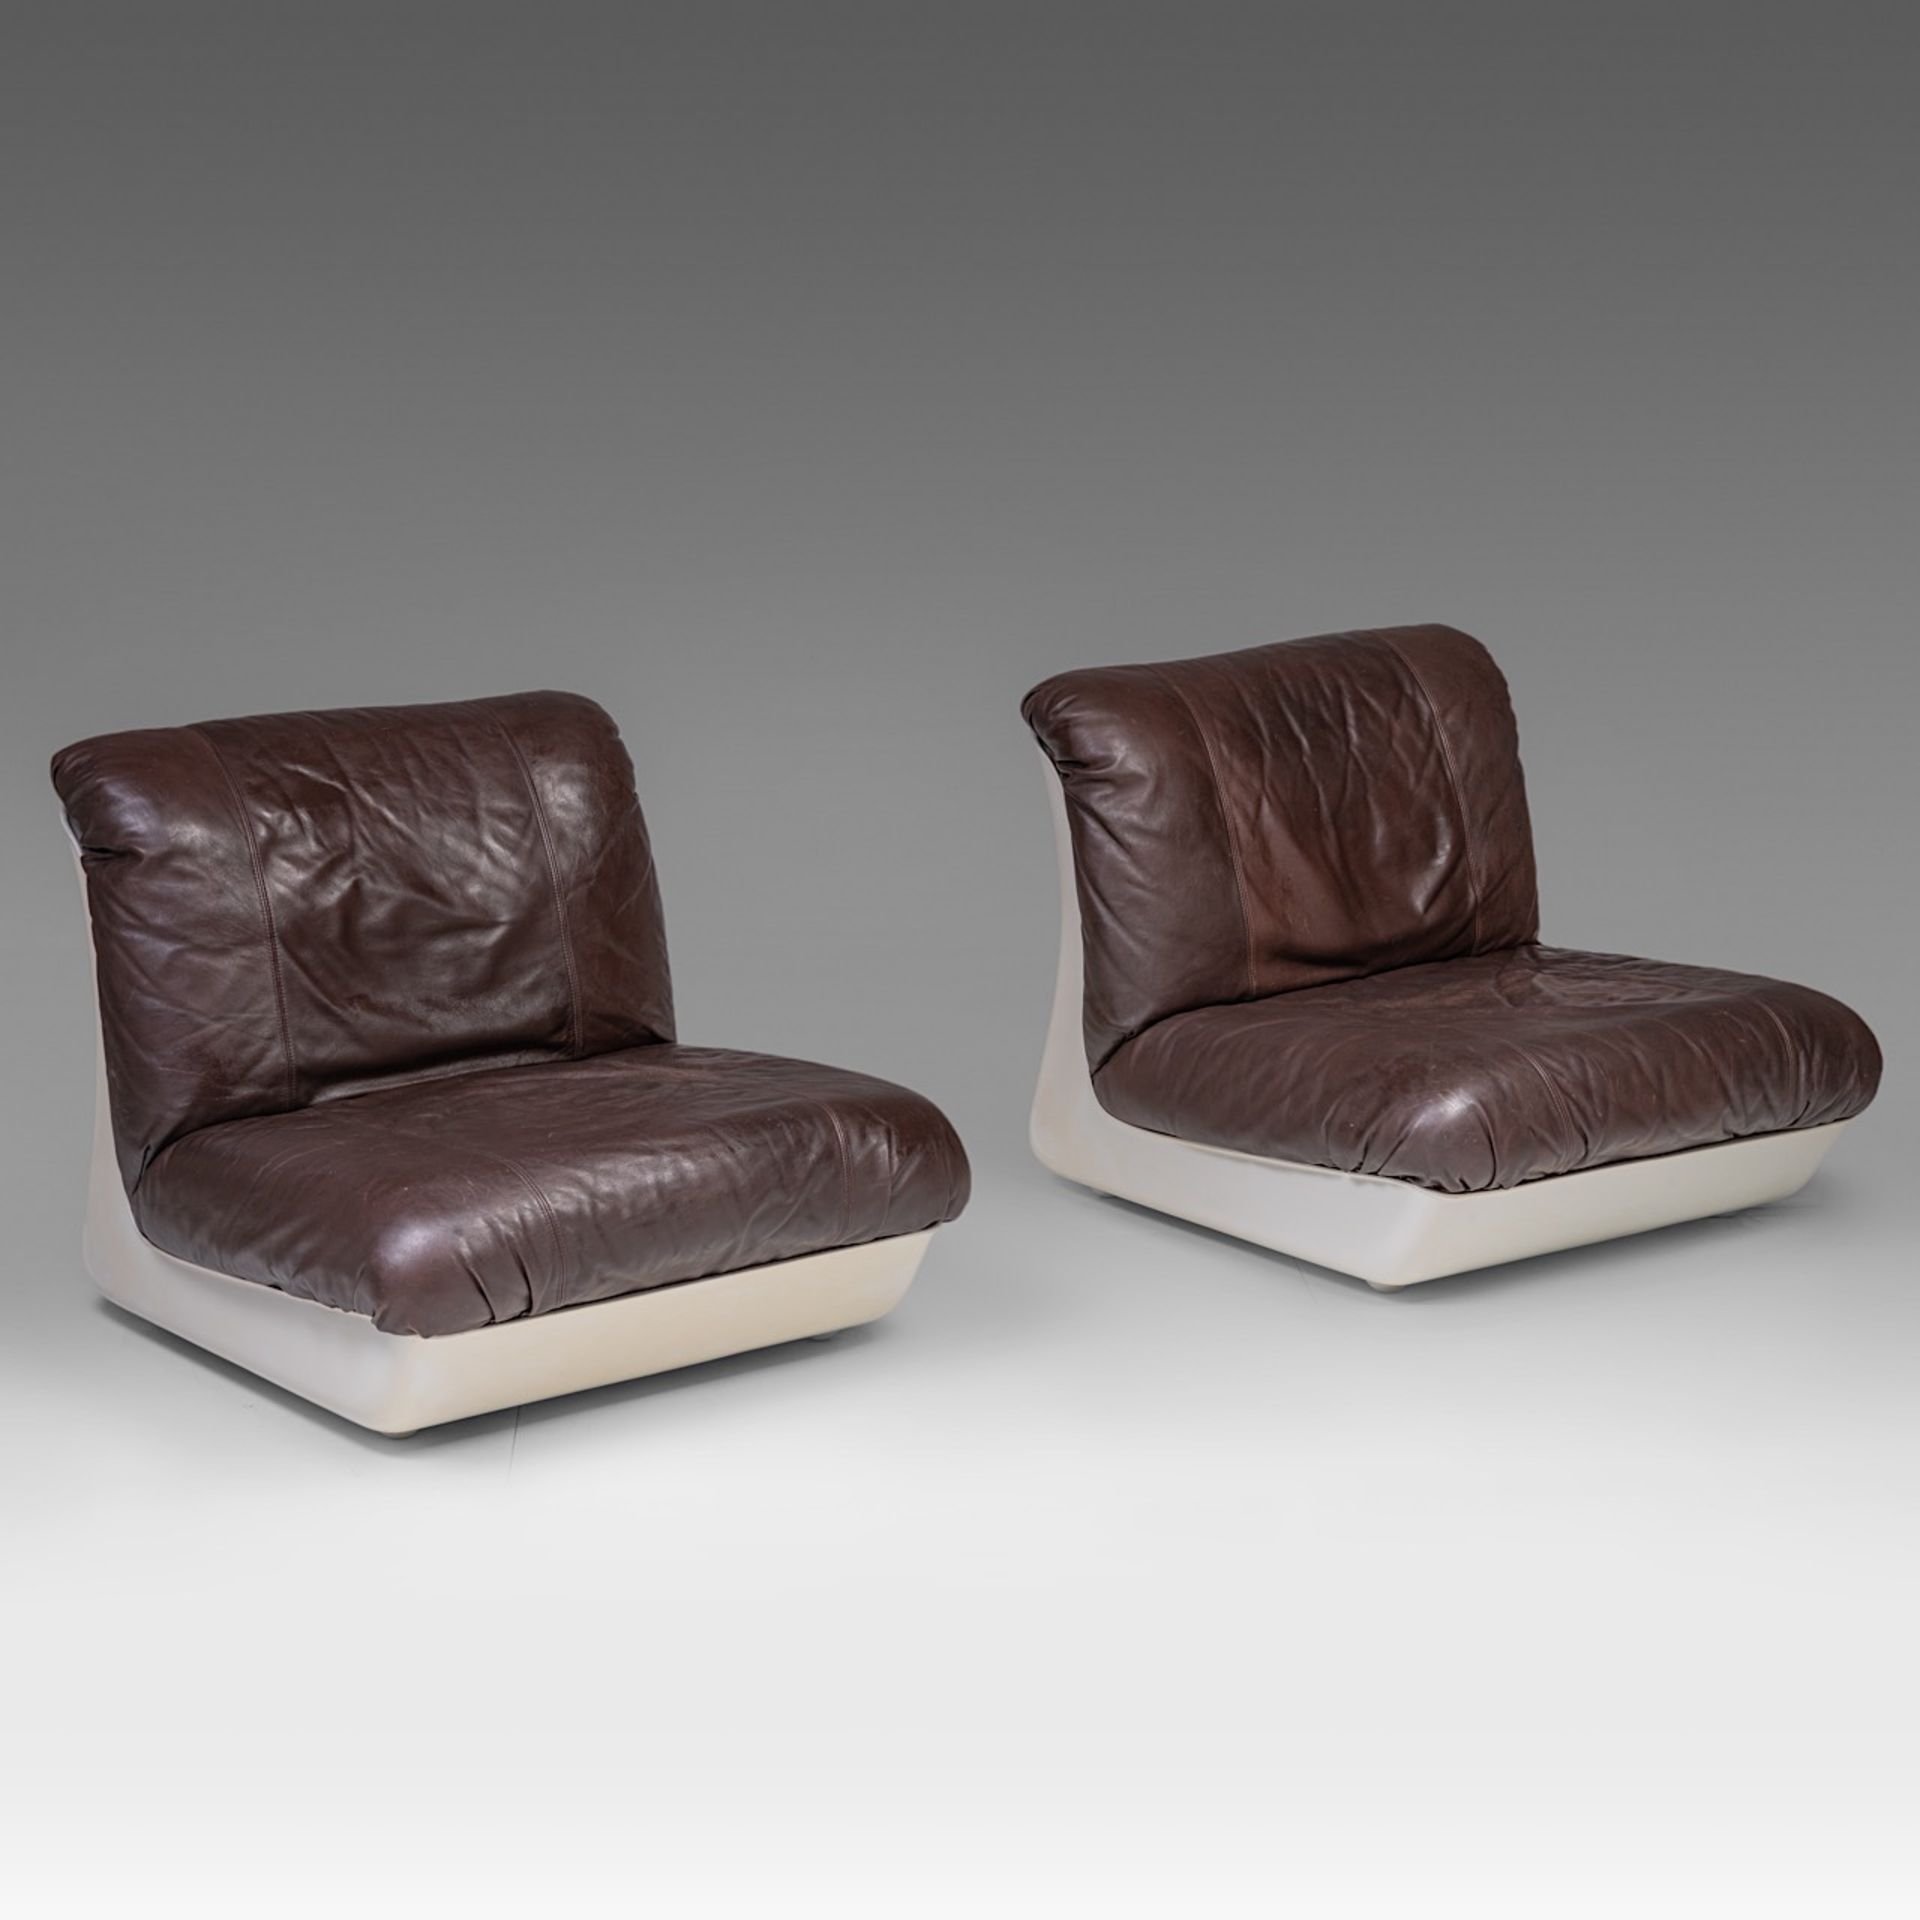 A vintage pair of loacoda chairs by Waldmann, Golz en Schmidt, made by Durlet, Belgium 1972, H 73 - - Image 3 of 12